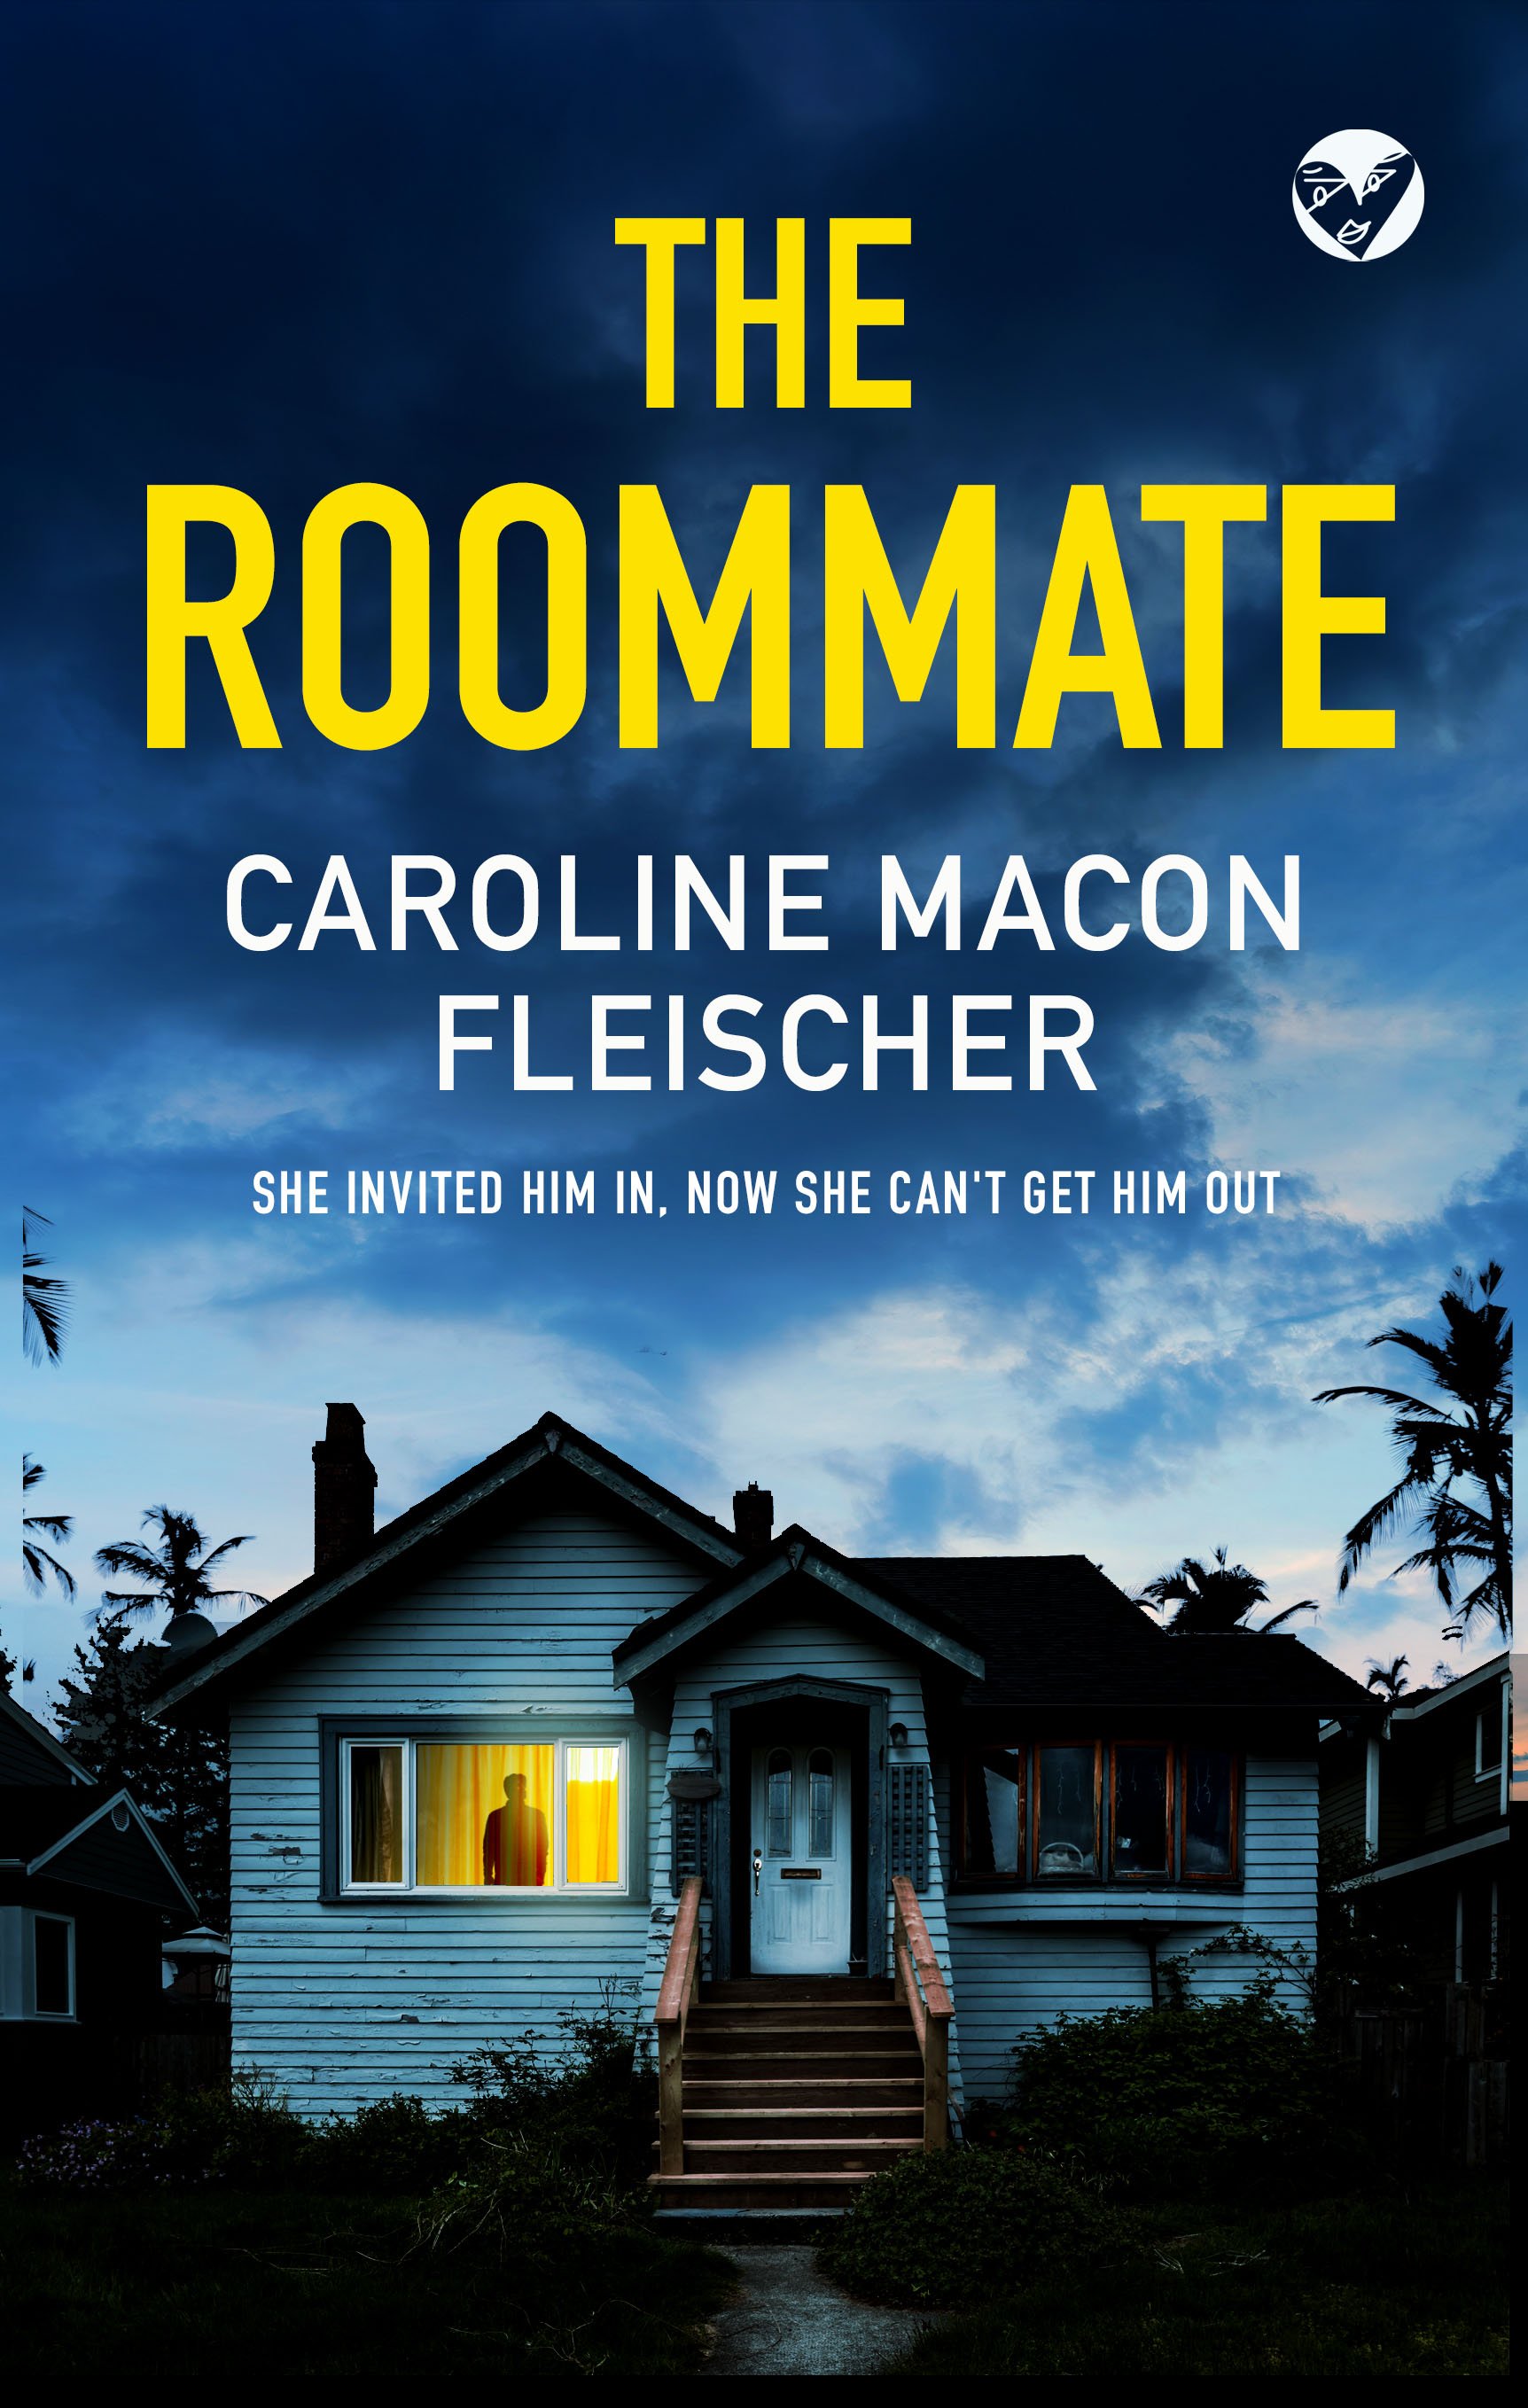 THE ROOMATE Cover publish.jpeg